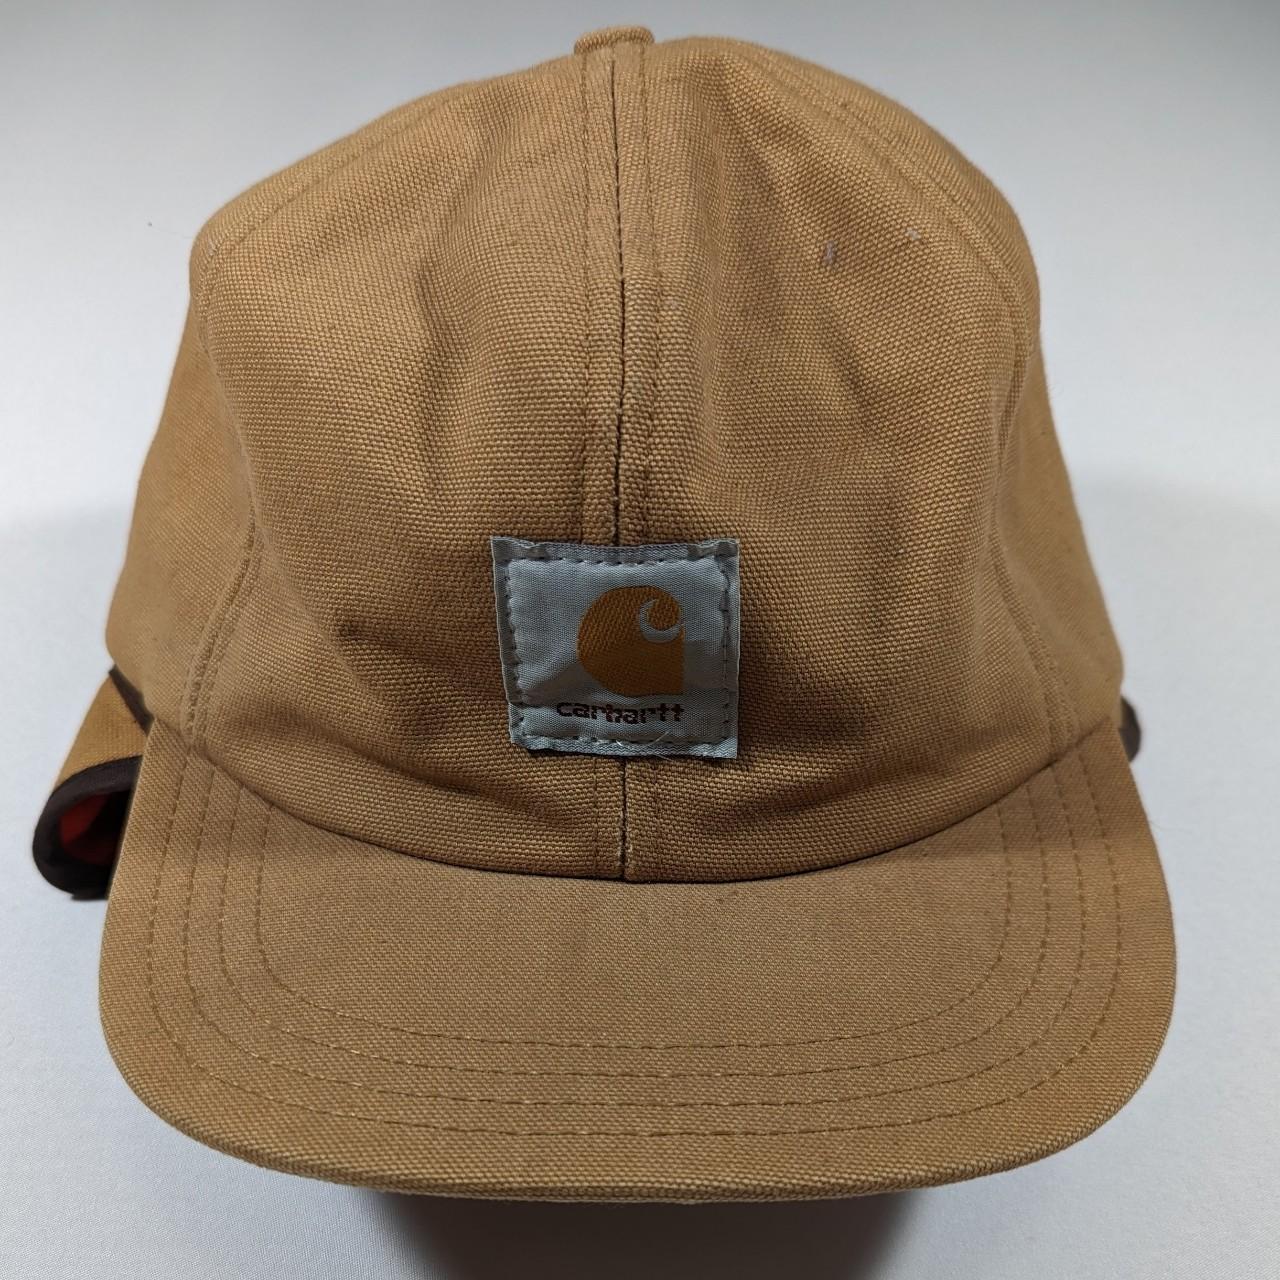 Vintage Carhartt Hat Lining Ear Flaps Fitted Red... - Depop